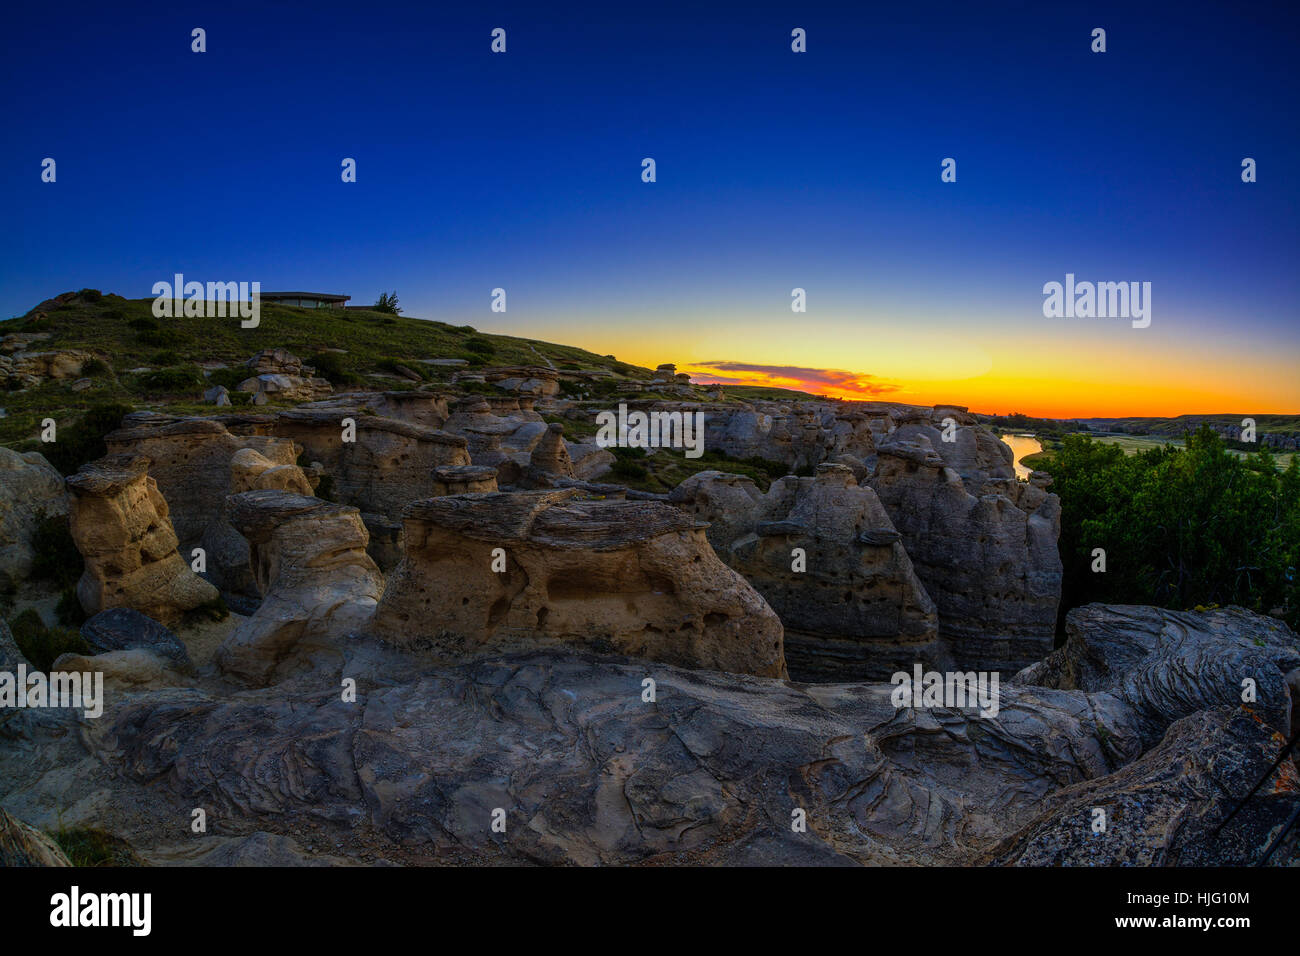 Sunrise over the Hoodoo badlands at Writing on Stone Provincial Park and Áísínai'pi National Historic Site in Alberta, Canada. Stock Photo